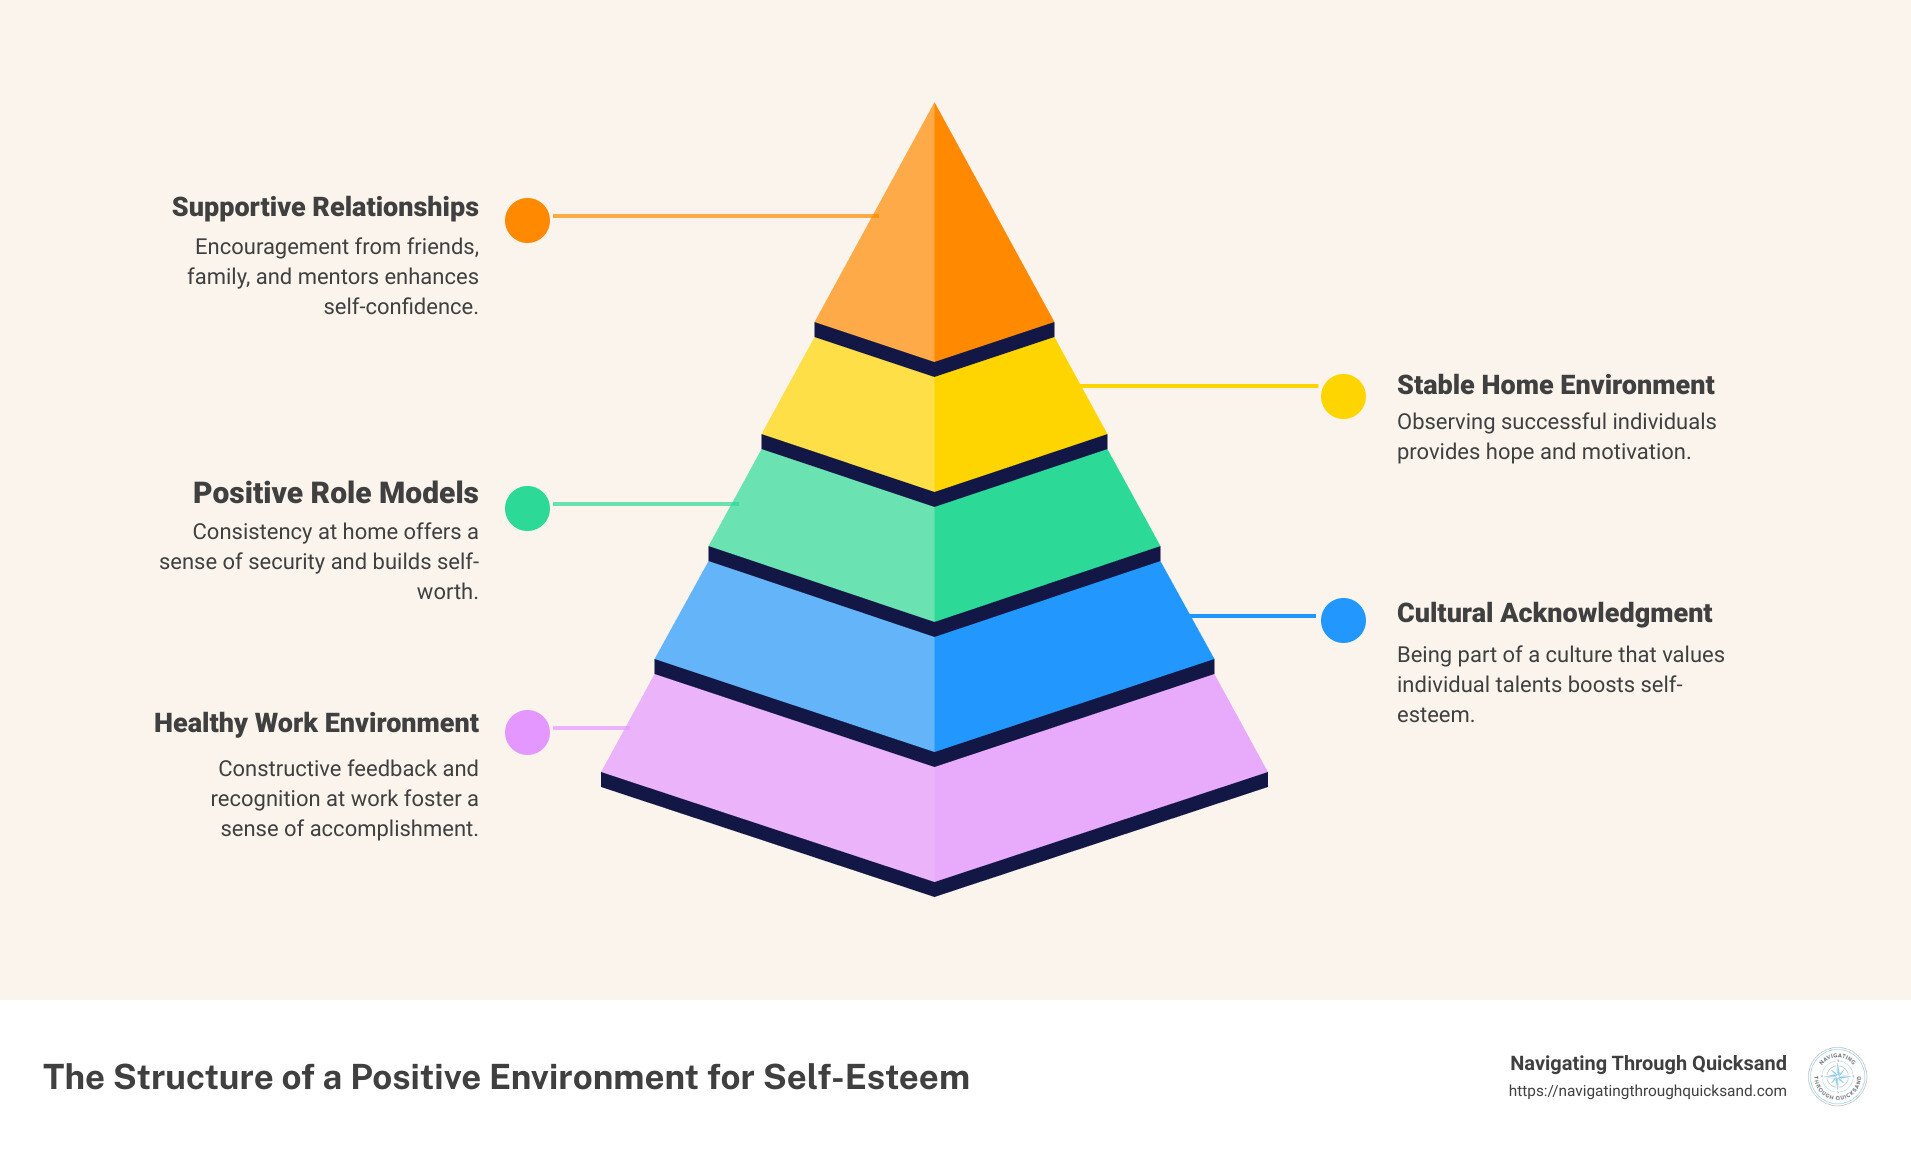 Detailed infographic showing the connection between positive environments and healthy self-esteem, highlighting supportive relationships, stable home dynamics, the influence of positive role models, the importance of cultural acknowledgment, and the role of a positive work environment in fostering self-esteem. - how does a positive environment contribute to healthy self-esteem? infographic pyramid-hierarchy-5-steps - low self esteem - emotional health